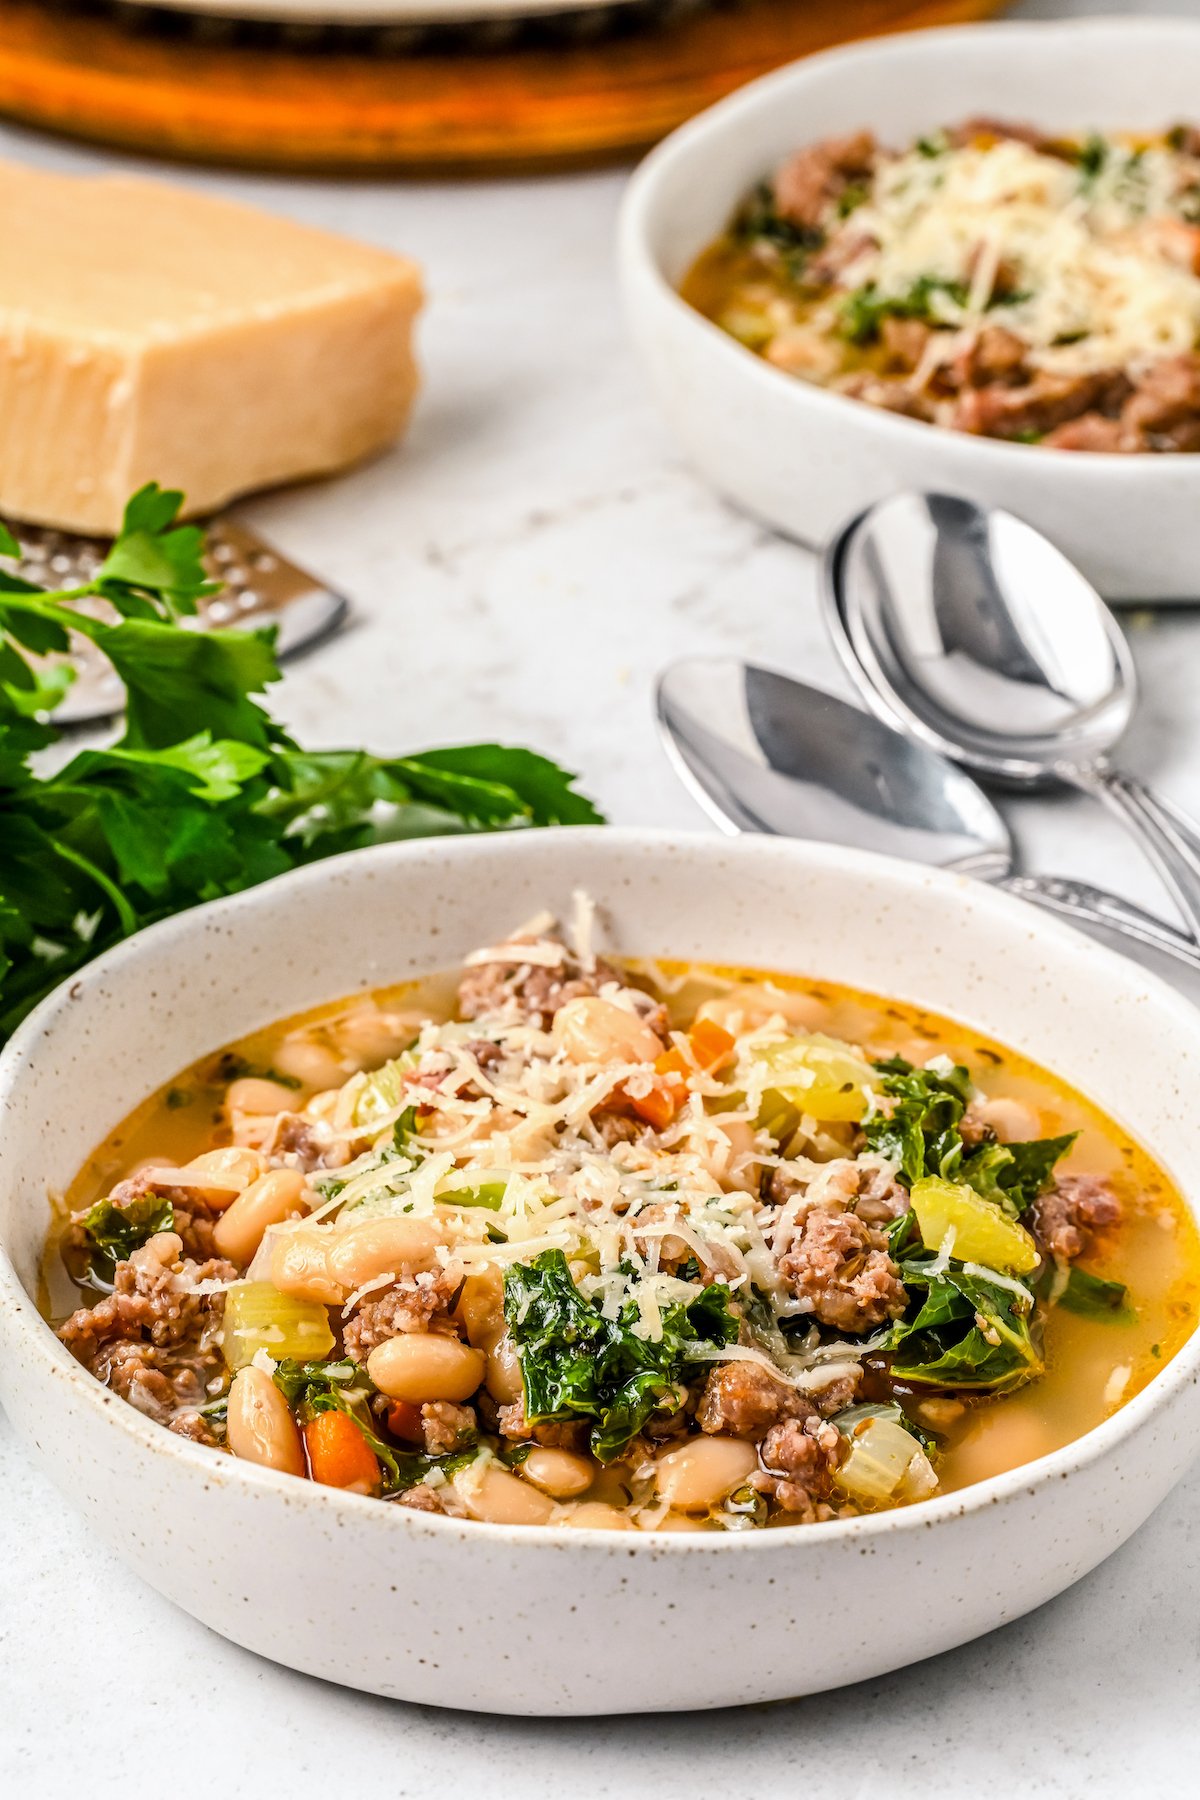 Bowls of sausage and kale soup, topped with shredded parmesan.